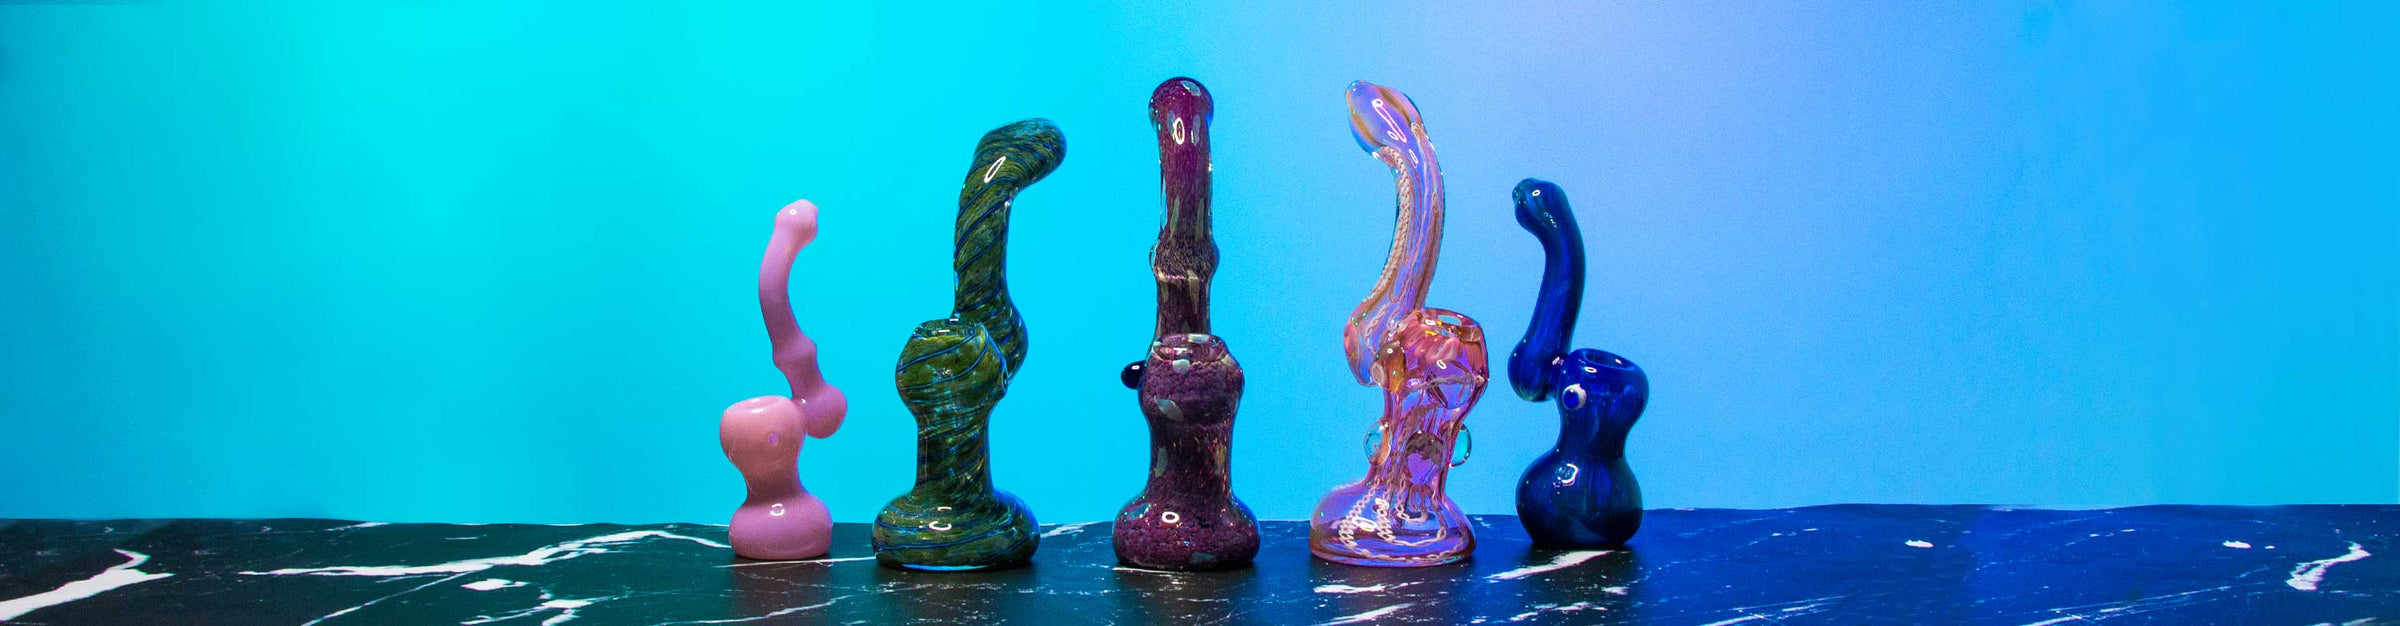 Various designs of Bubblers inside studio with colorful lighting